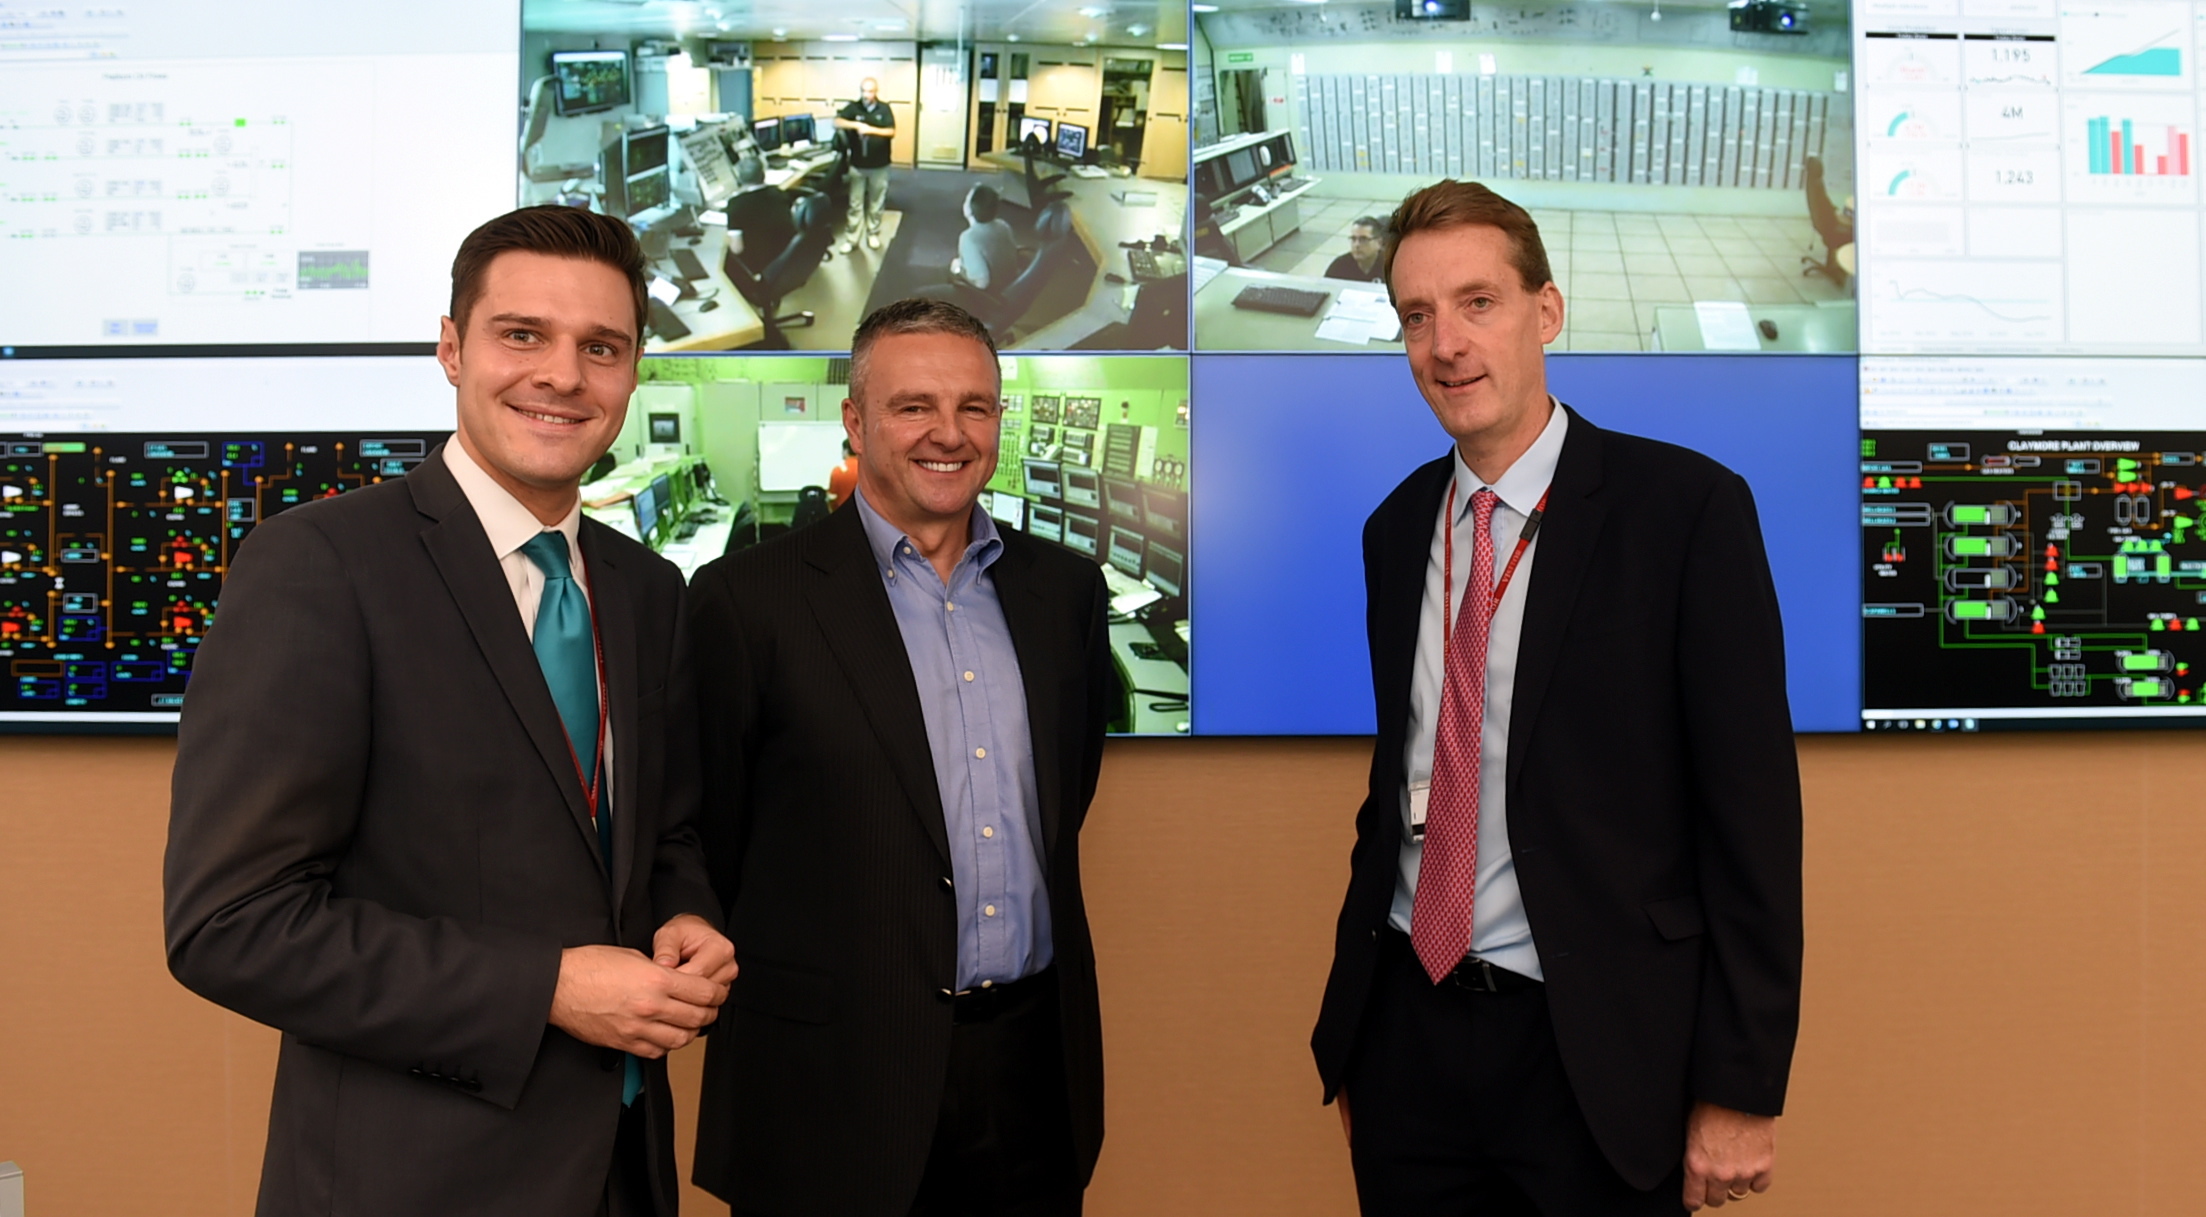 The new integrated operations centre at Repsol Sinopec, Aberdeen. In the picture are from left: Ross Thomson, MP, Bill Dunnett, Repsol Sinopec Uk Managing director and Andy Samuel, Oil and Gas Authority chief executive.